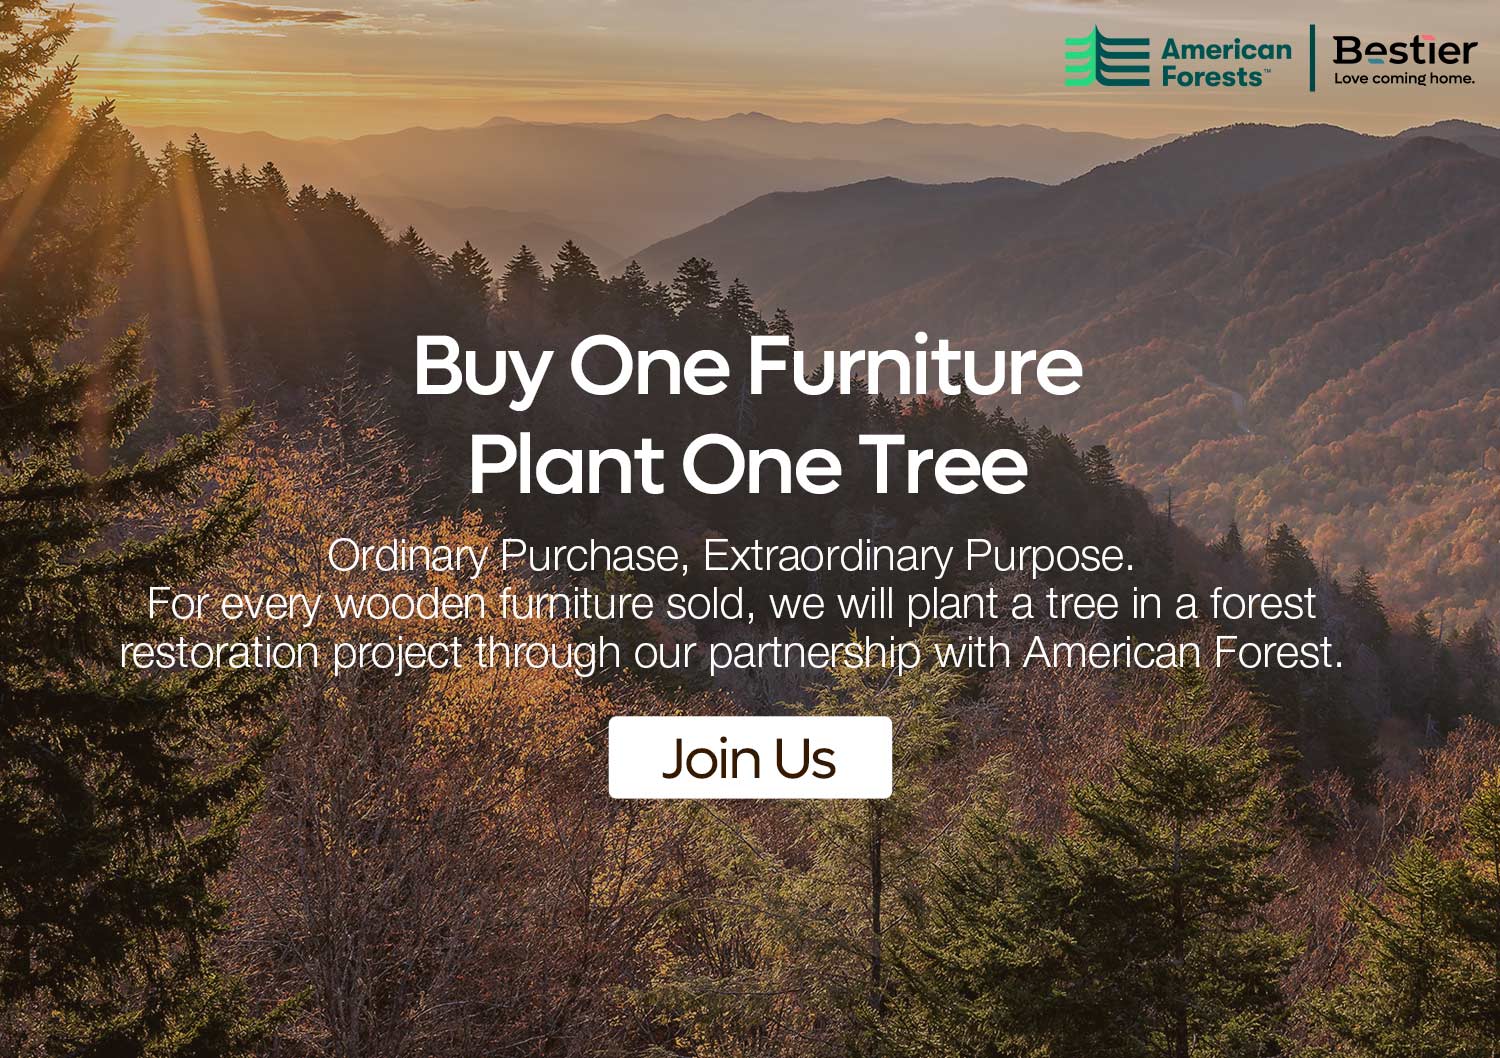 bestier modern furniture buy one plant one tree with american forest (1)